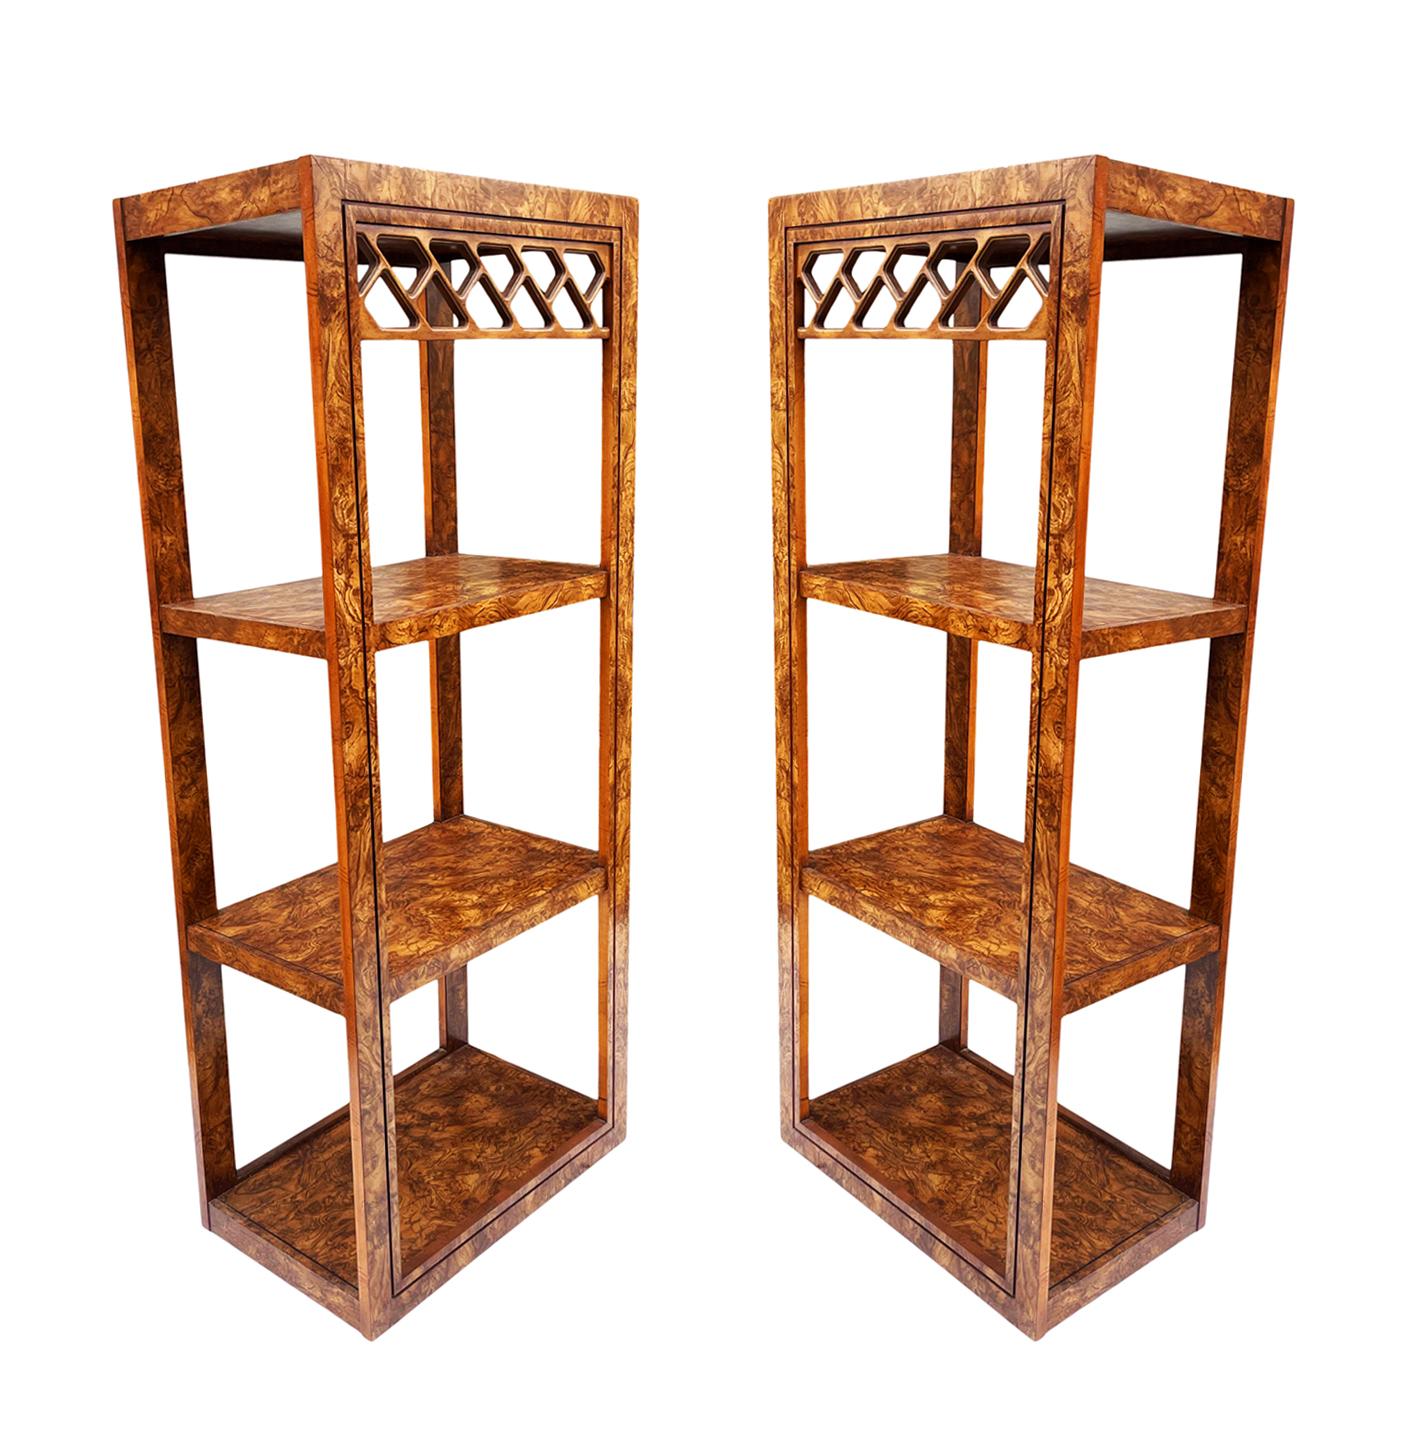 American Pair of Mid Century Modern Burl Wood Etageres, Wall Unit or Book Shelves For Sale